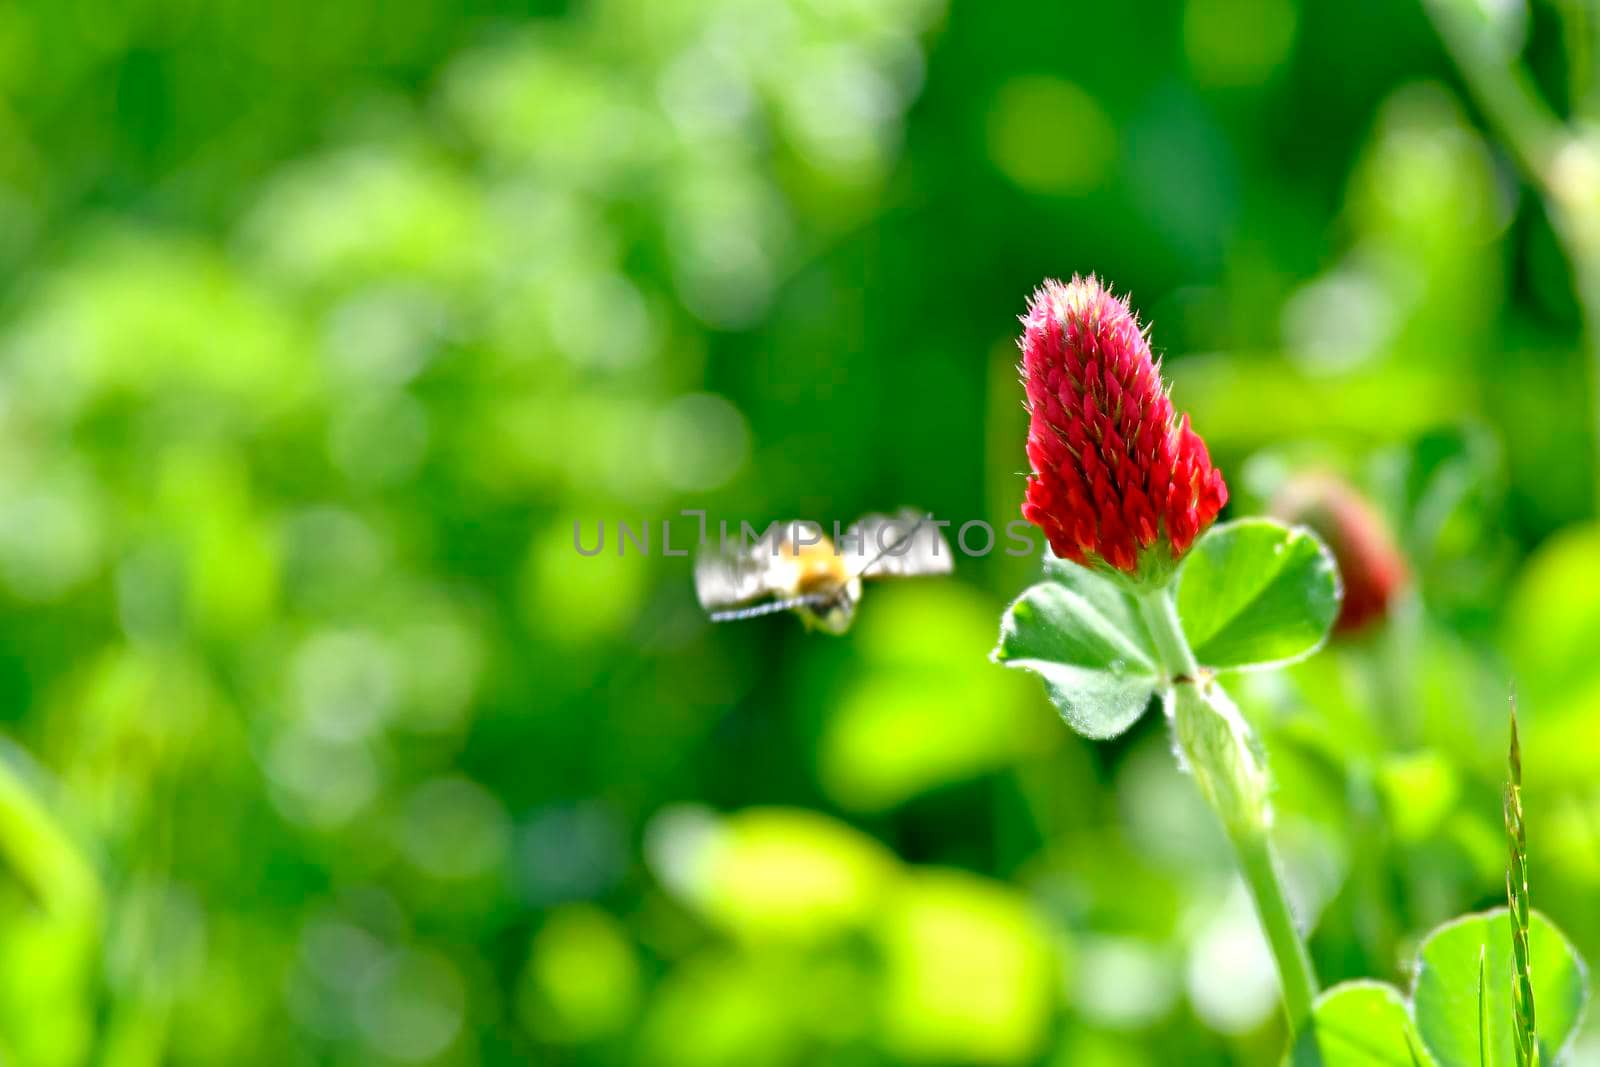 crimson clover with flower in spring in Germany by Jochen